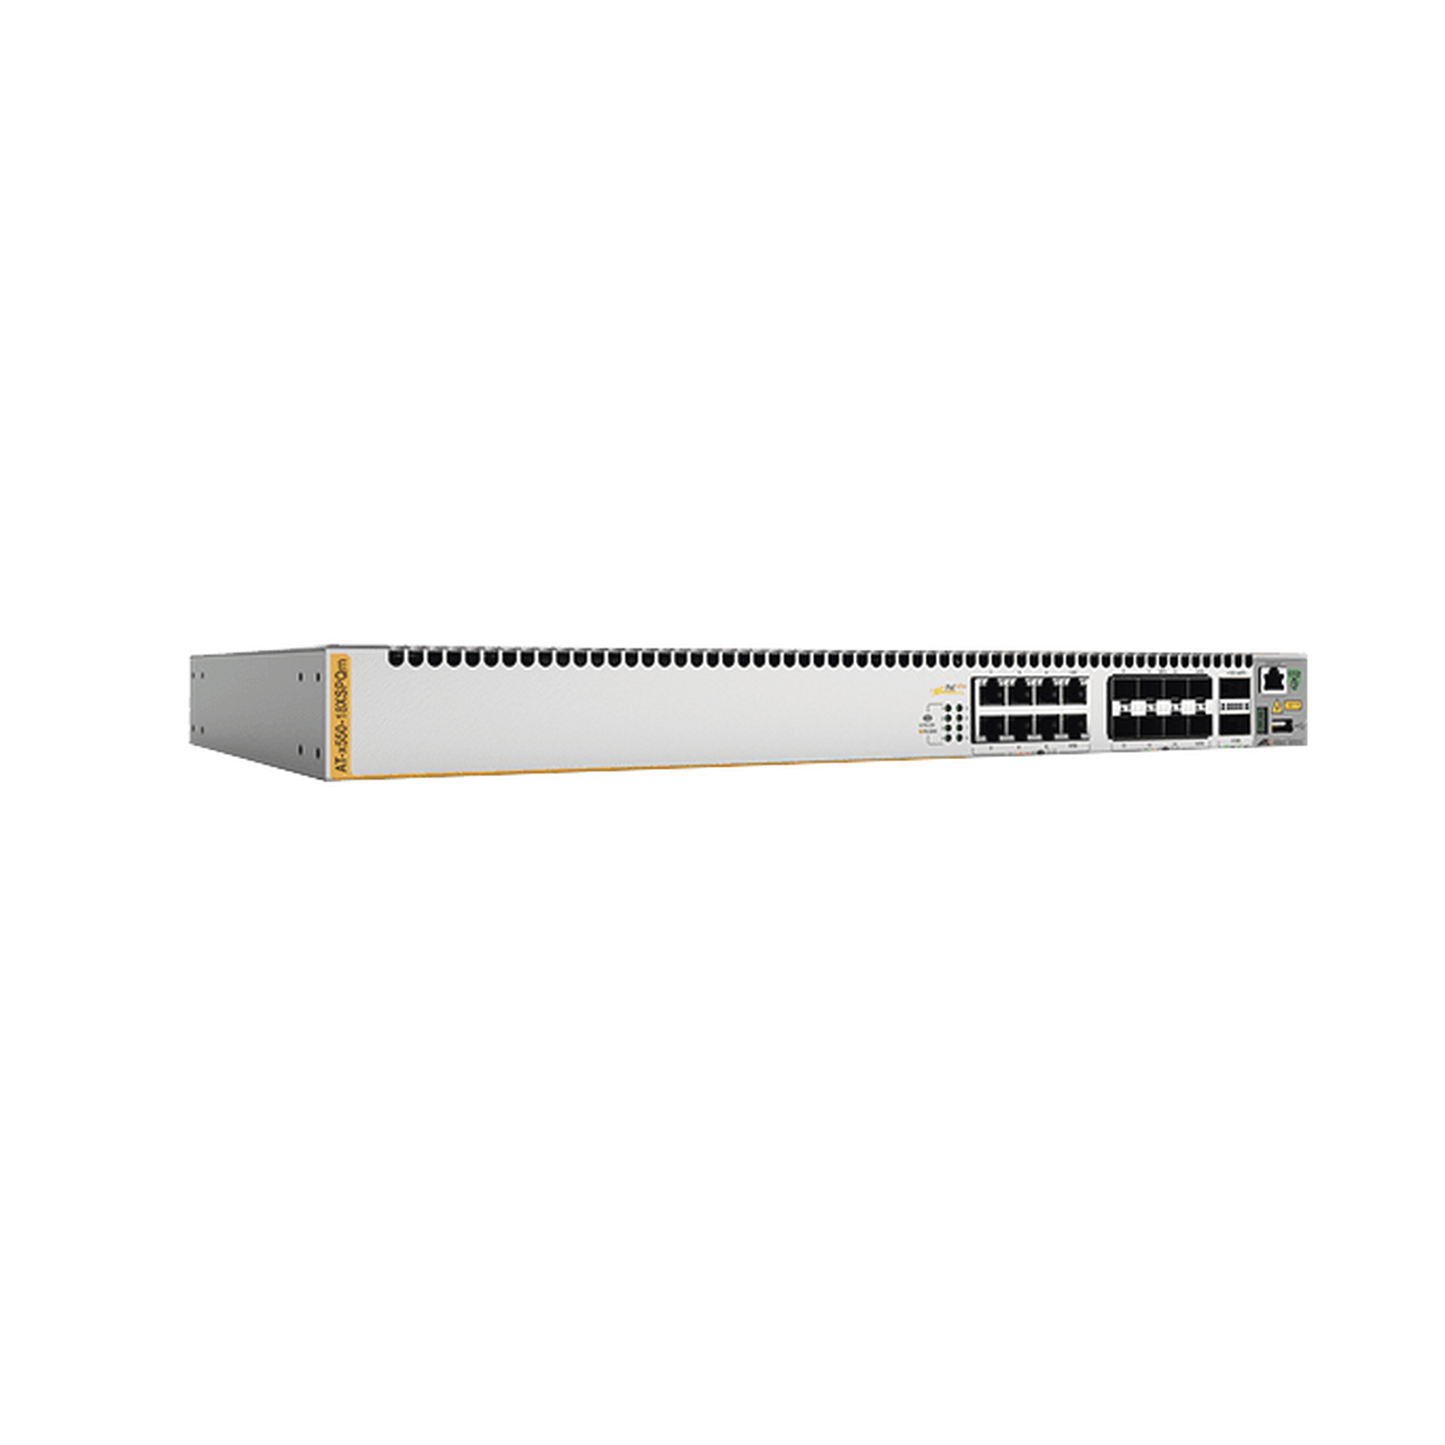 Switch Stackeable Inteligente Capa 3, 8 puertos 1 G / 2.5 G / 5 G / 10 G BaseT PoE+, 8 puertos 1 G / 10 G SFP+ y 2 puertos 40 G QSFP, 240 W